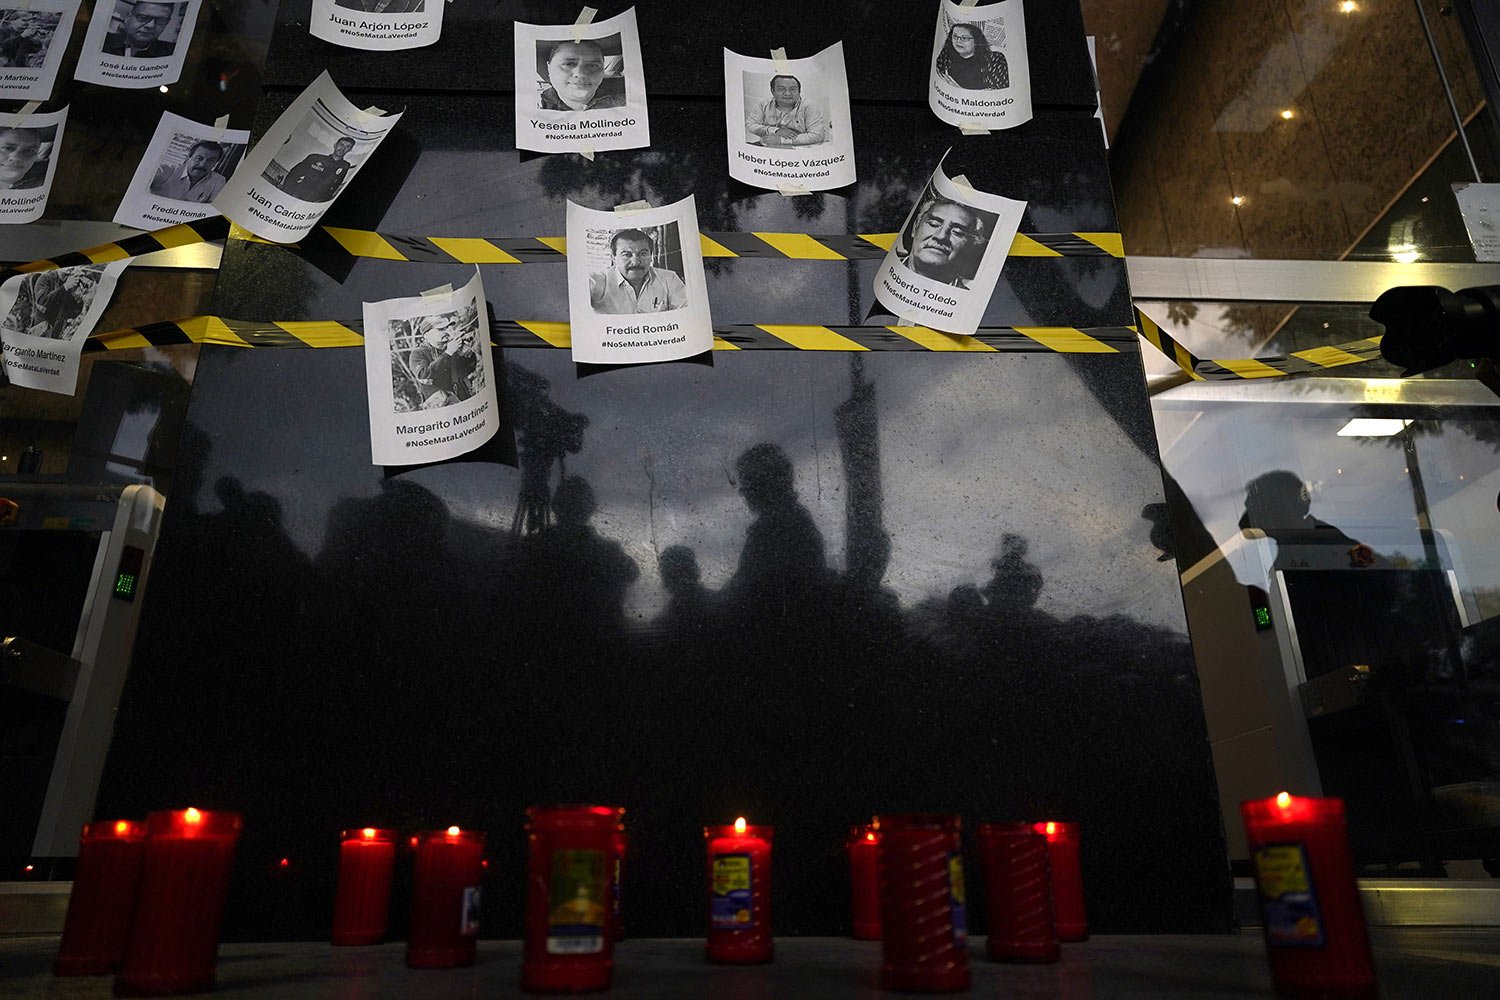  Photos of slain journalists are posted on a wall during a vigil to protest the murder of journalist Fredid Roman, outside the Attorney General's office in Mexico City, Wednesday, Aug. 24, 2022. Roman was the 15th media worker killed so far this year